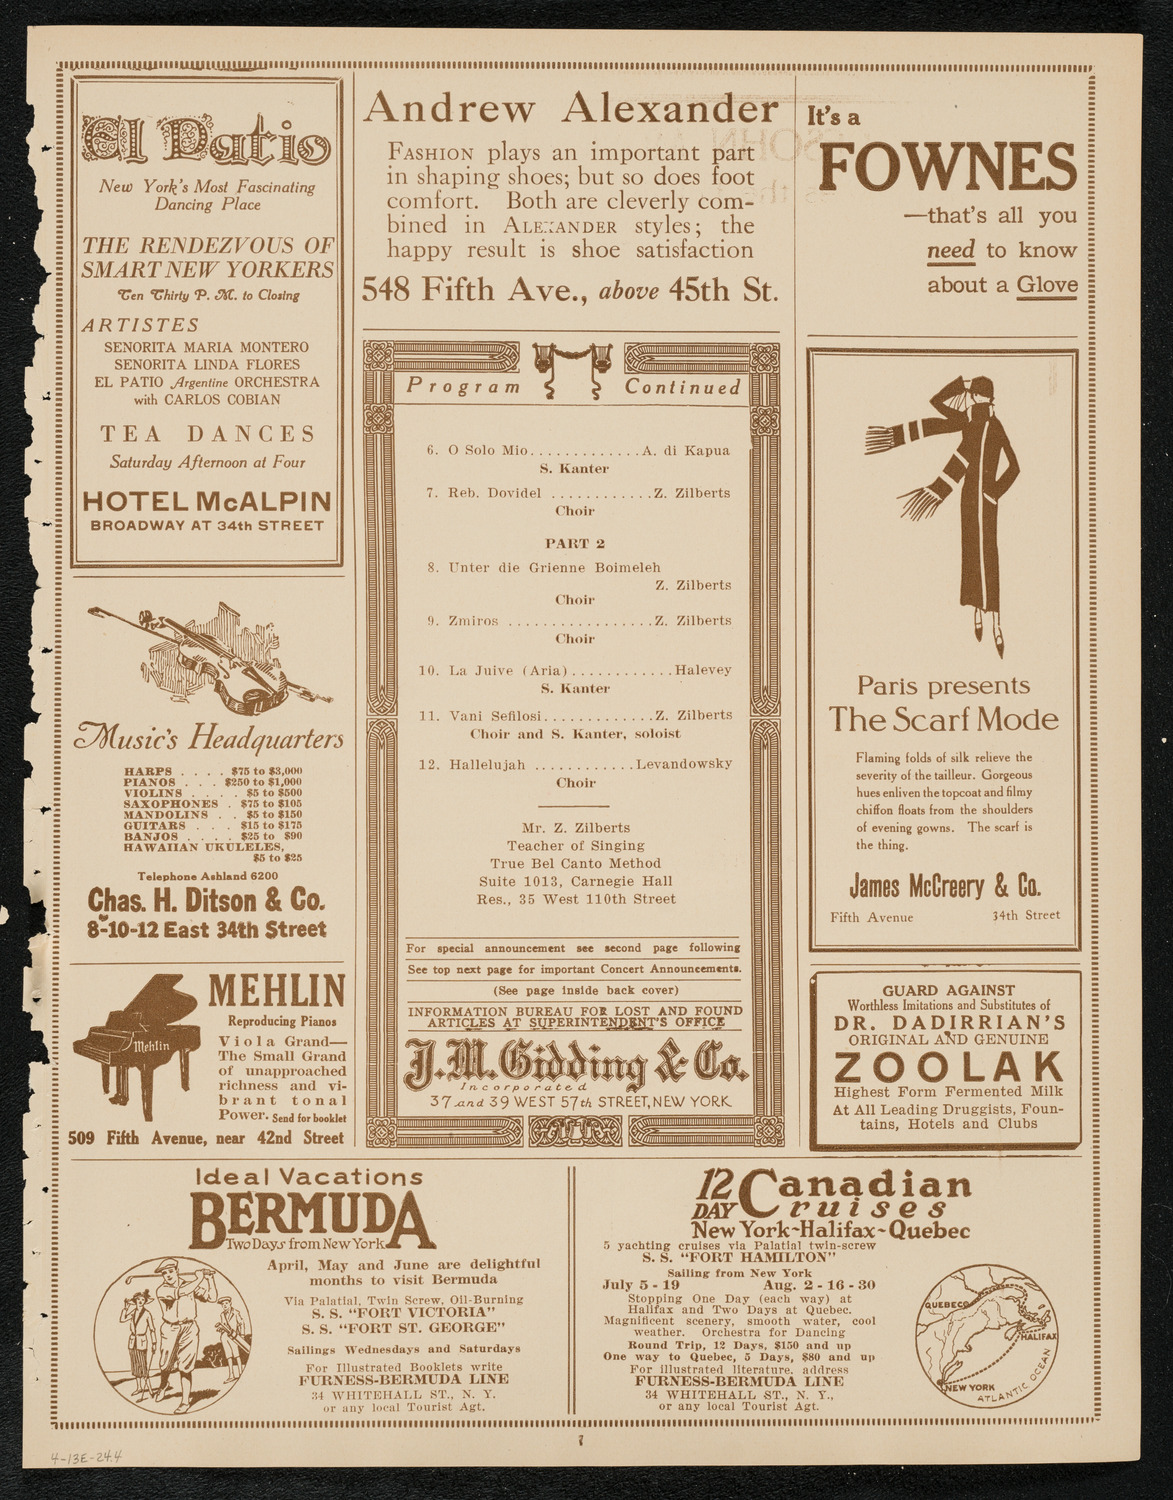 Benefit: Jewish Home for Convalescents, April 13, 1924, program page 7